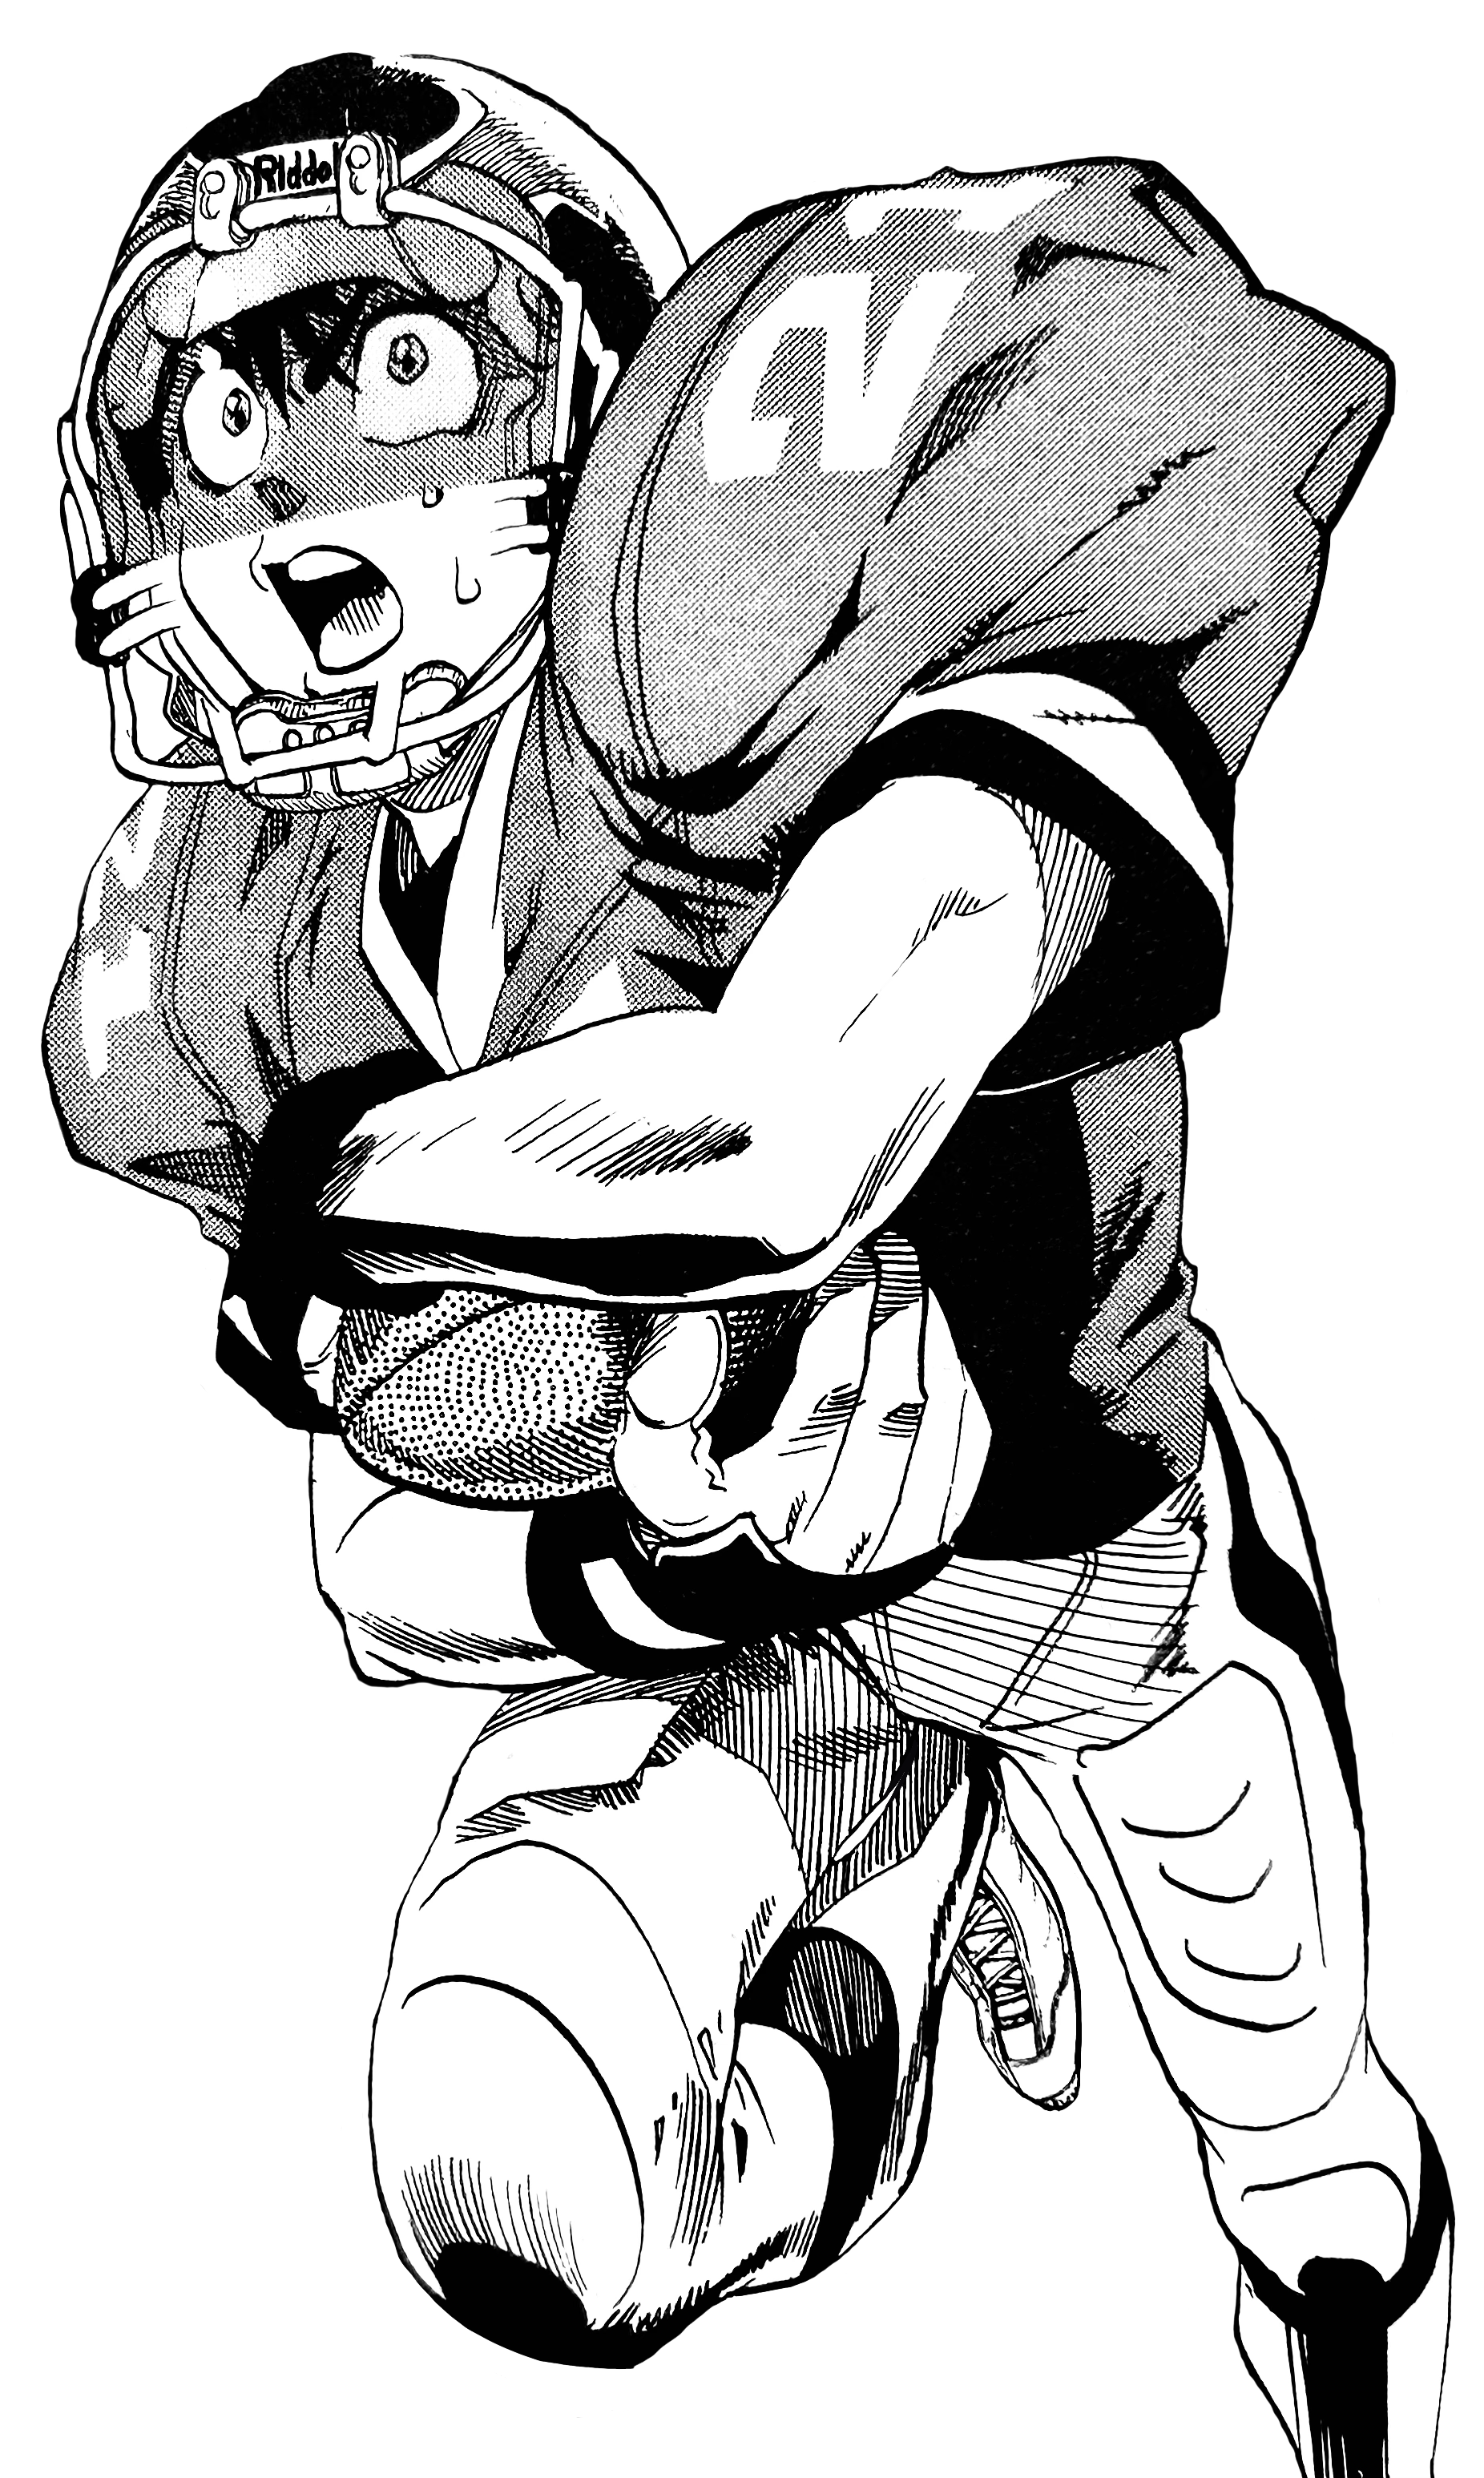 A transparent illustration of Sena in his team uniform and helmet, equipped with the tinted visor of his persona, 'Eyeshield 21.' He's running with the ball gripped in both his hands, his arms crossed in front of him to secure it.